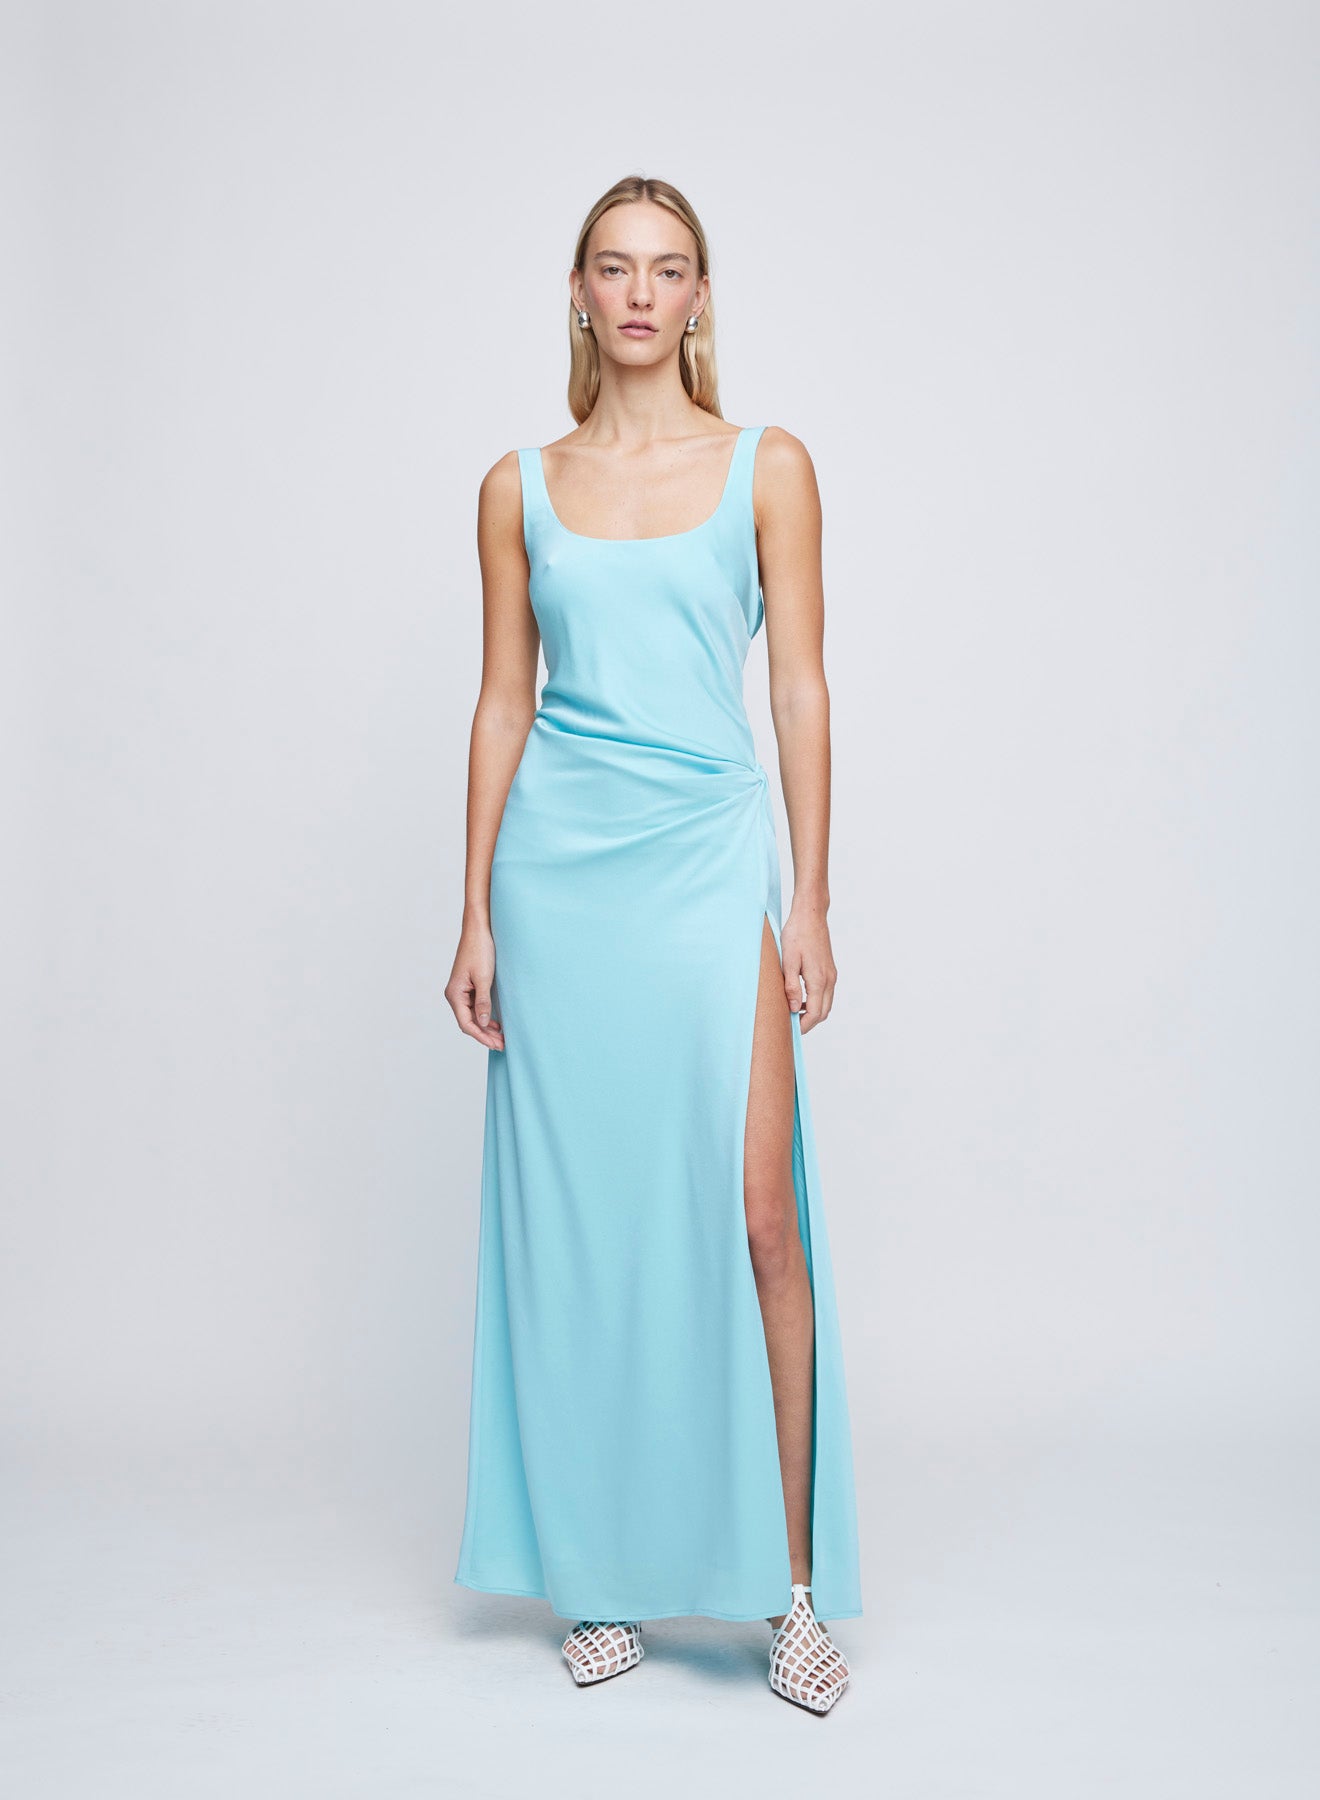 The ANNA QUAN Etta Dress in Electric Teal is a nod to the 90's and red carpet dressing. A bias cut satin slip maxi dress skims the body whilst the side split compliments the gathered waist.